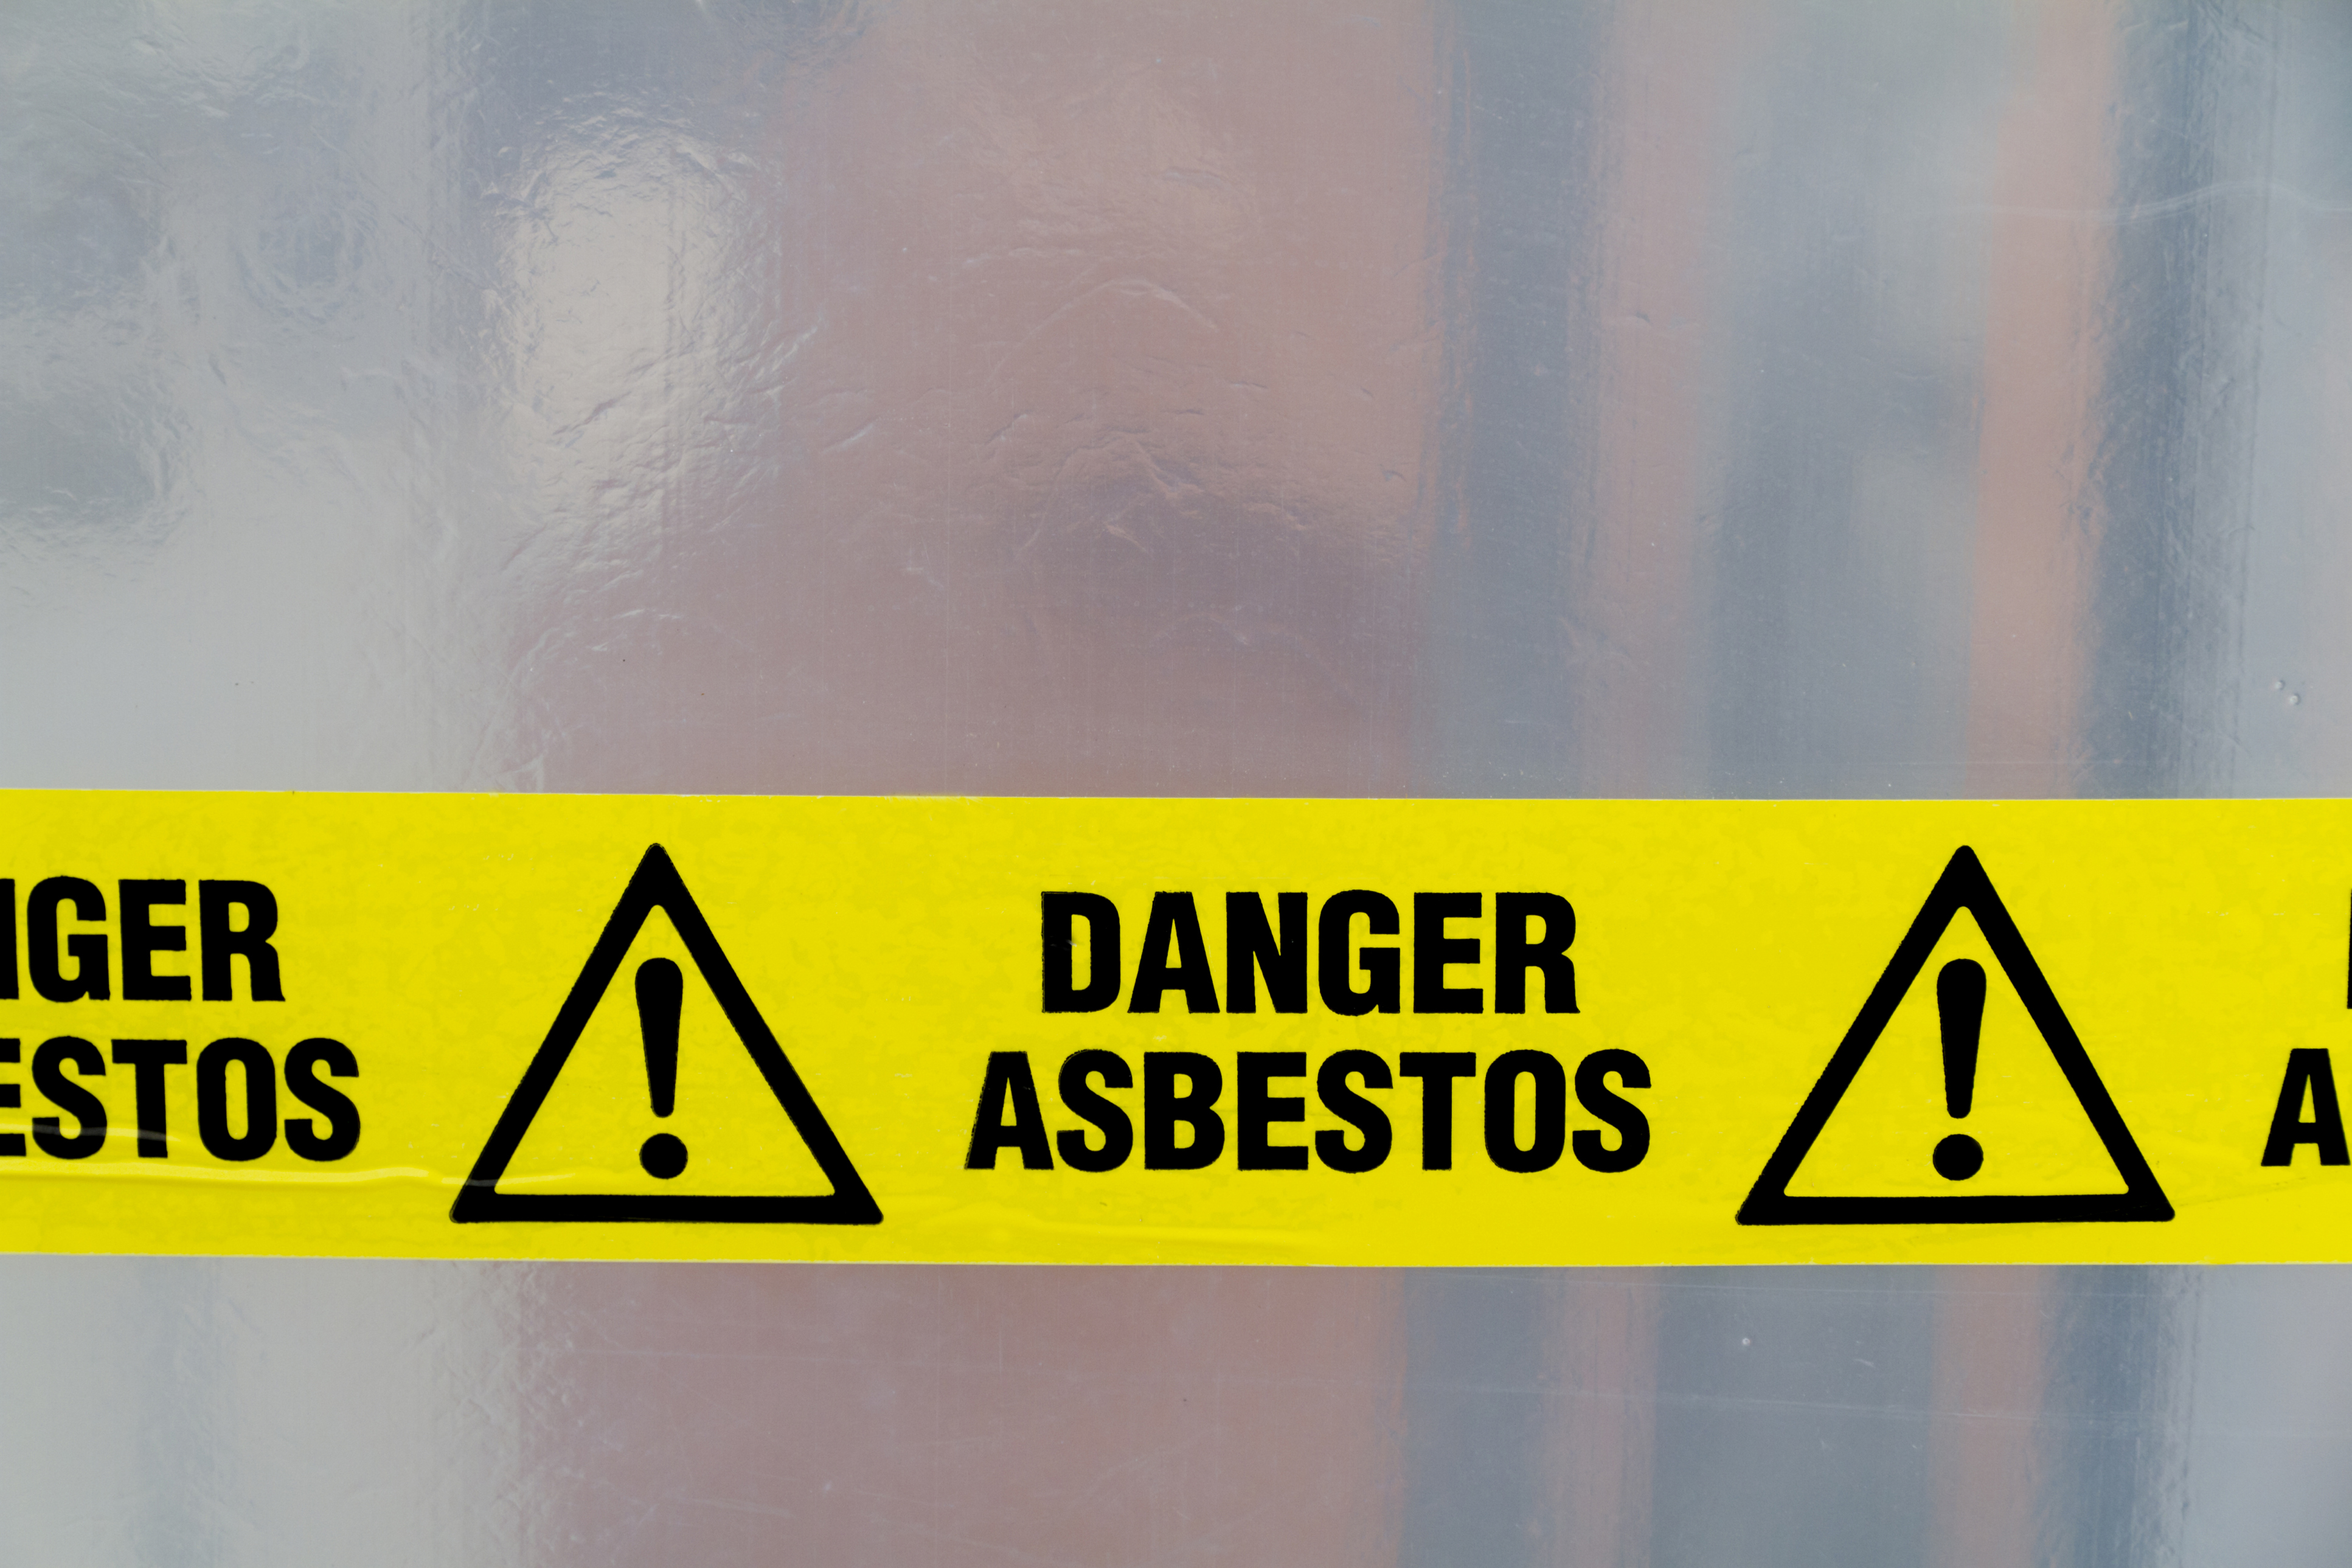 Appeals Court Affirms Decisions Granting Insurer's Motions To Set Aside Millions In Default Judgments In Asbestos Cases